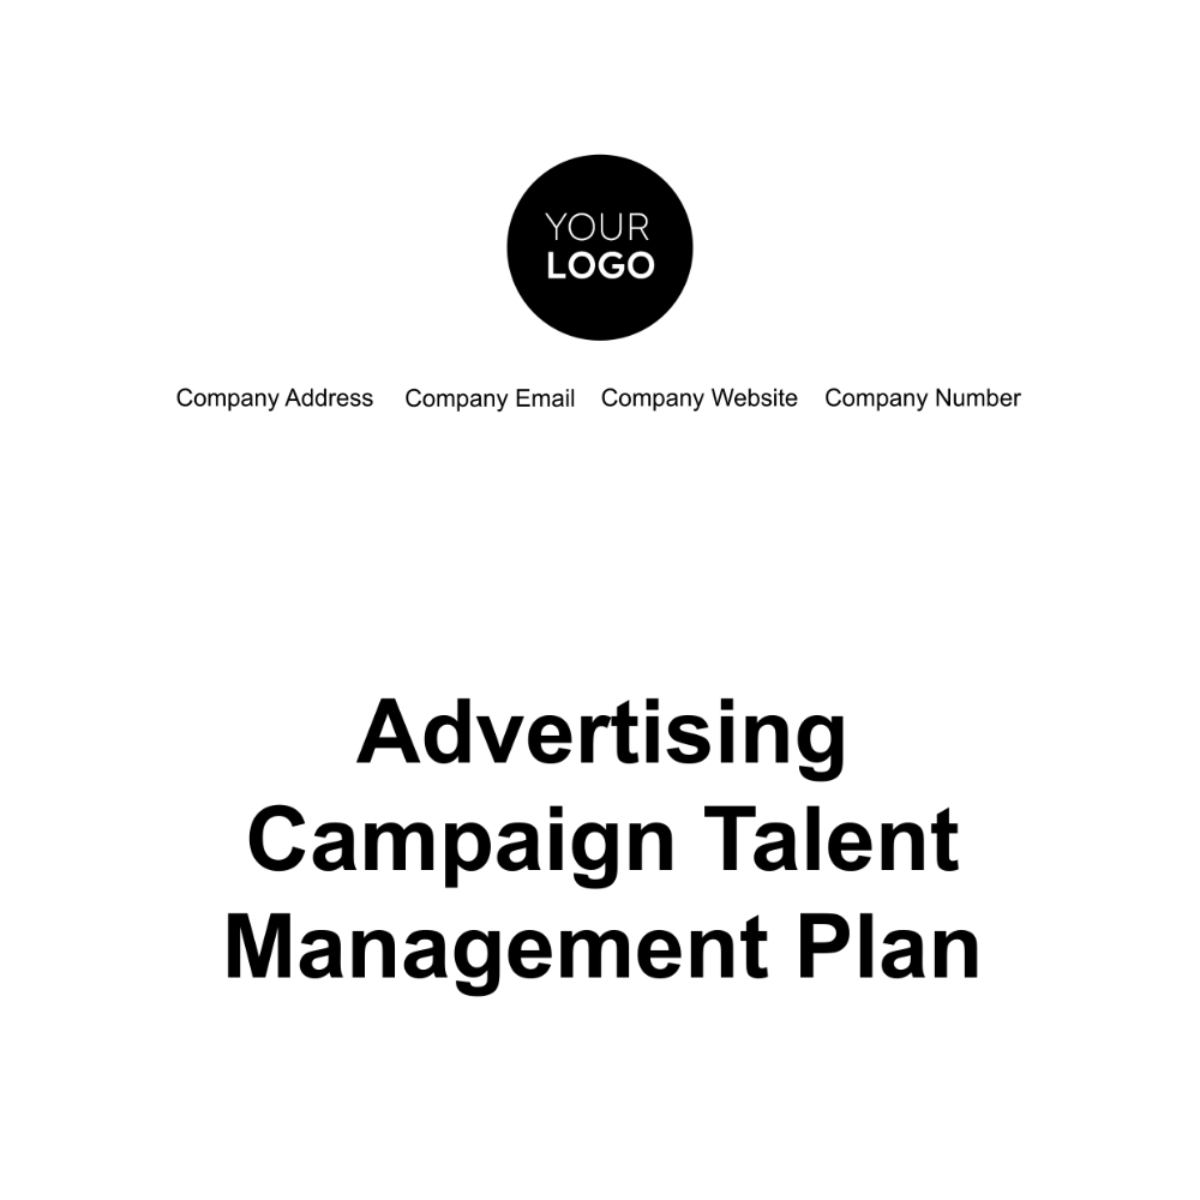 Advertising Campaign Talent Management Plan Template